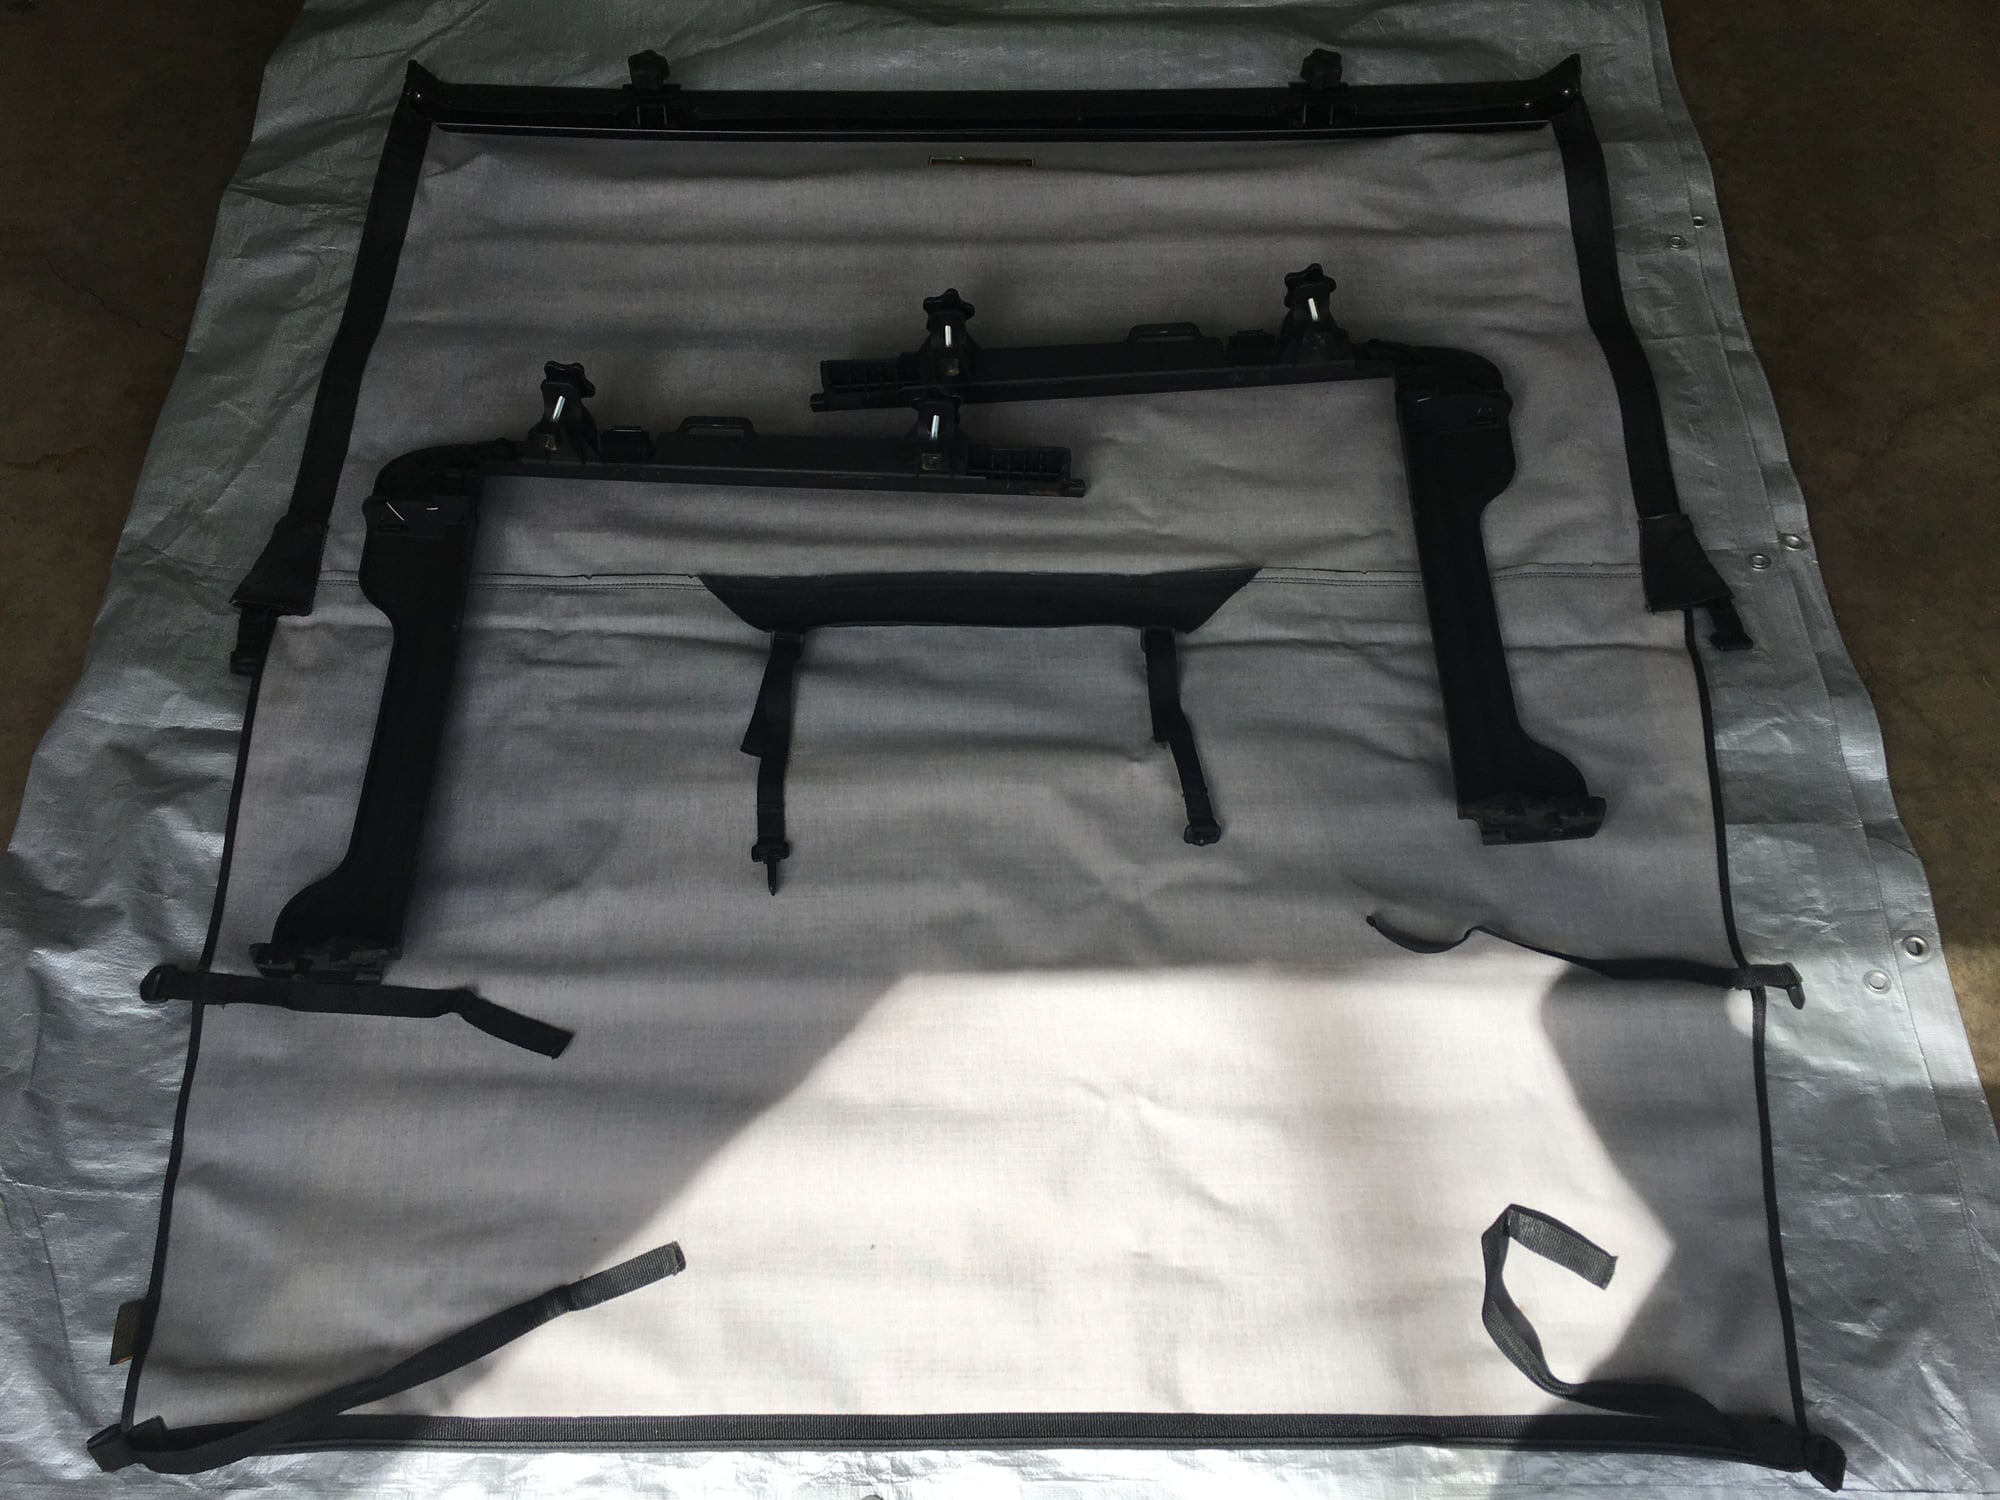 Accessories - Bestop Jeep JK Bikini Top (2DR cable style) - Used - 2007 to 2018 Jeep Wrangler - Winston Salem, NC 27040, United States